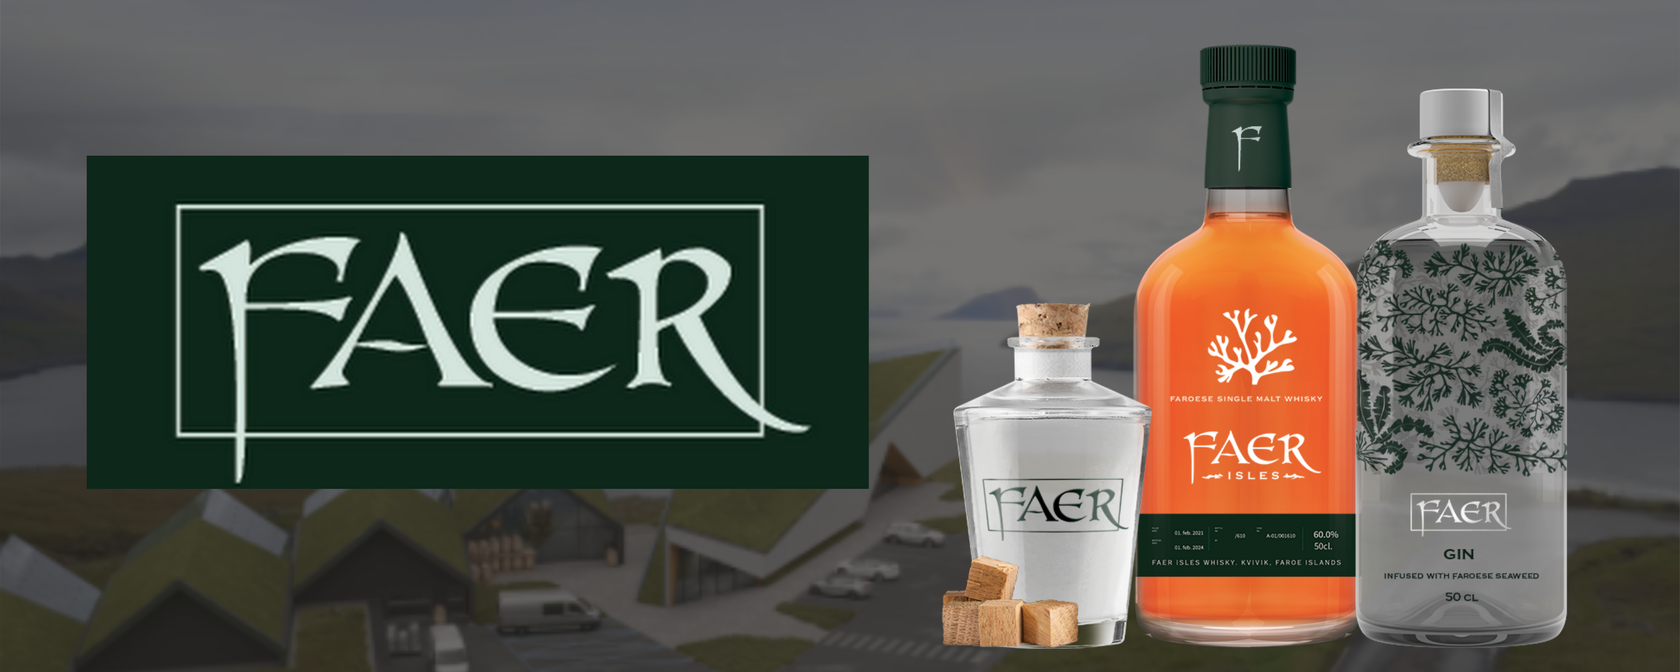 A new client - Faer and its products - Whiskey and Gin